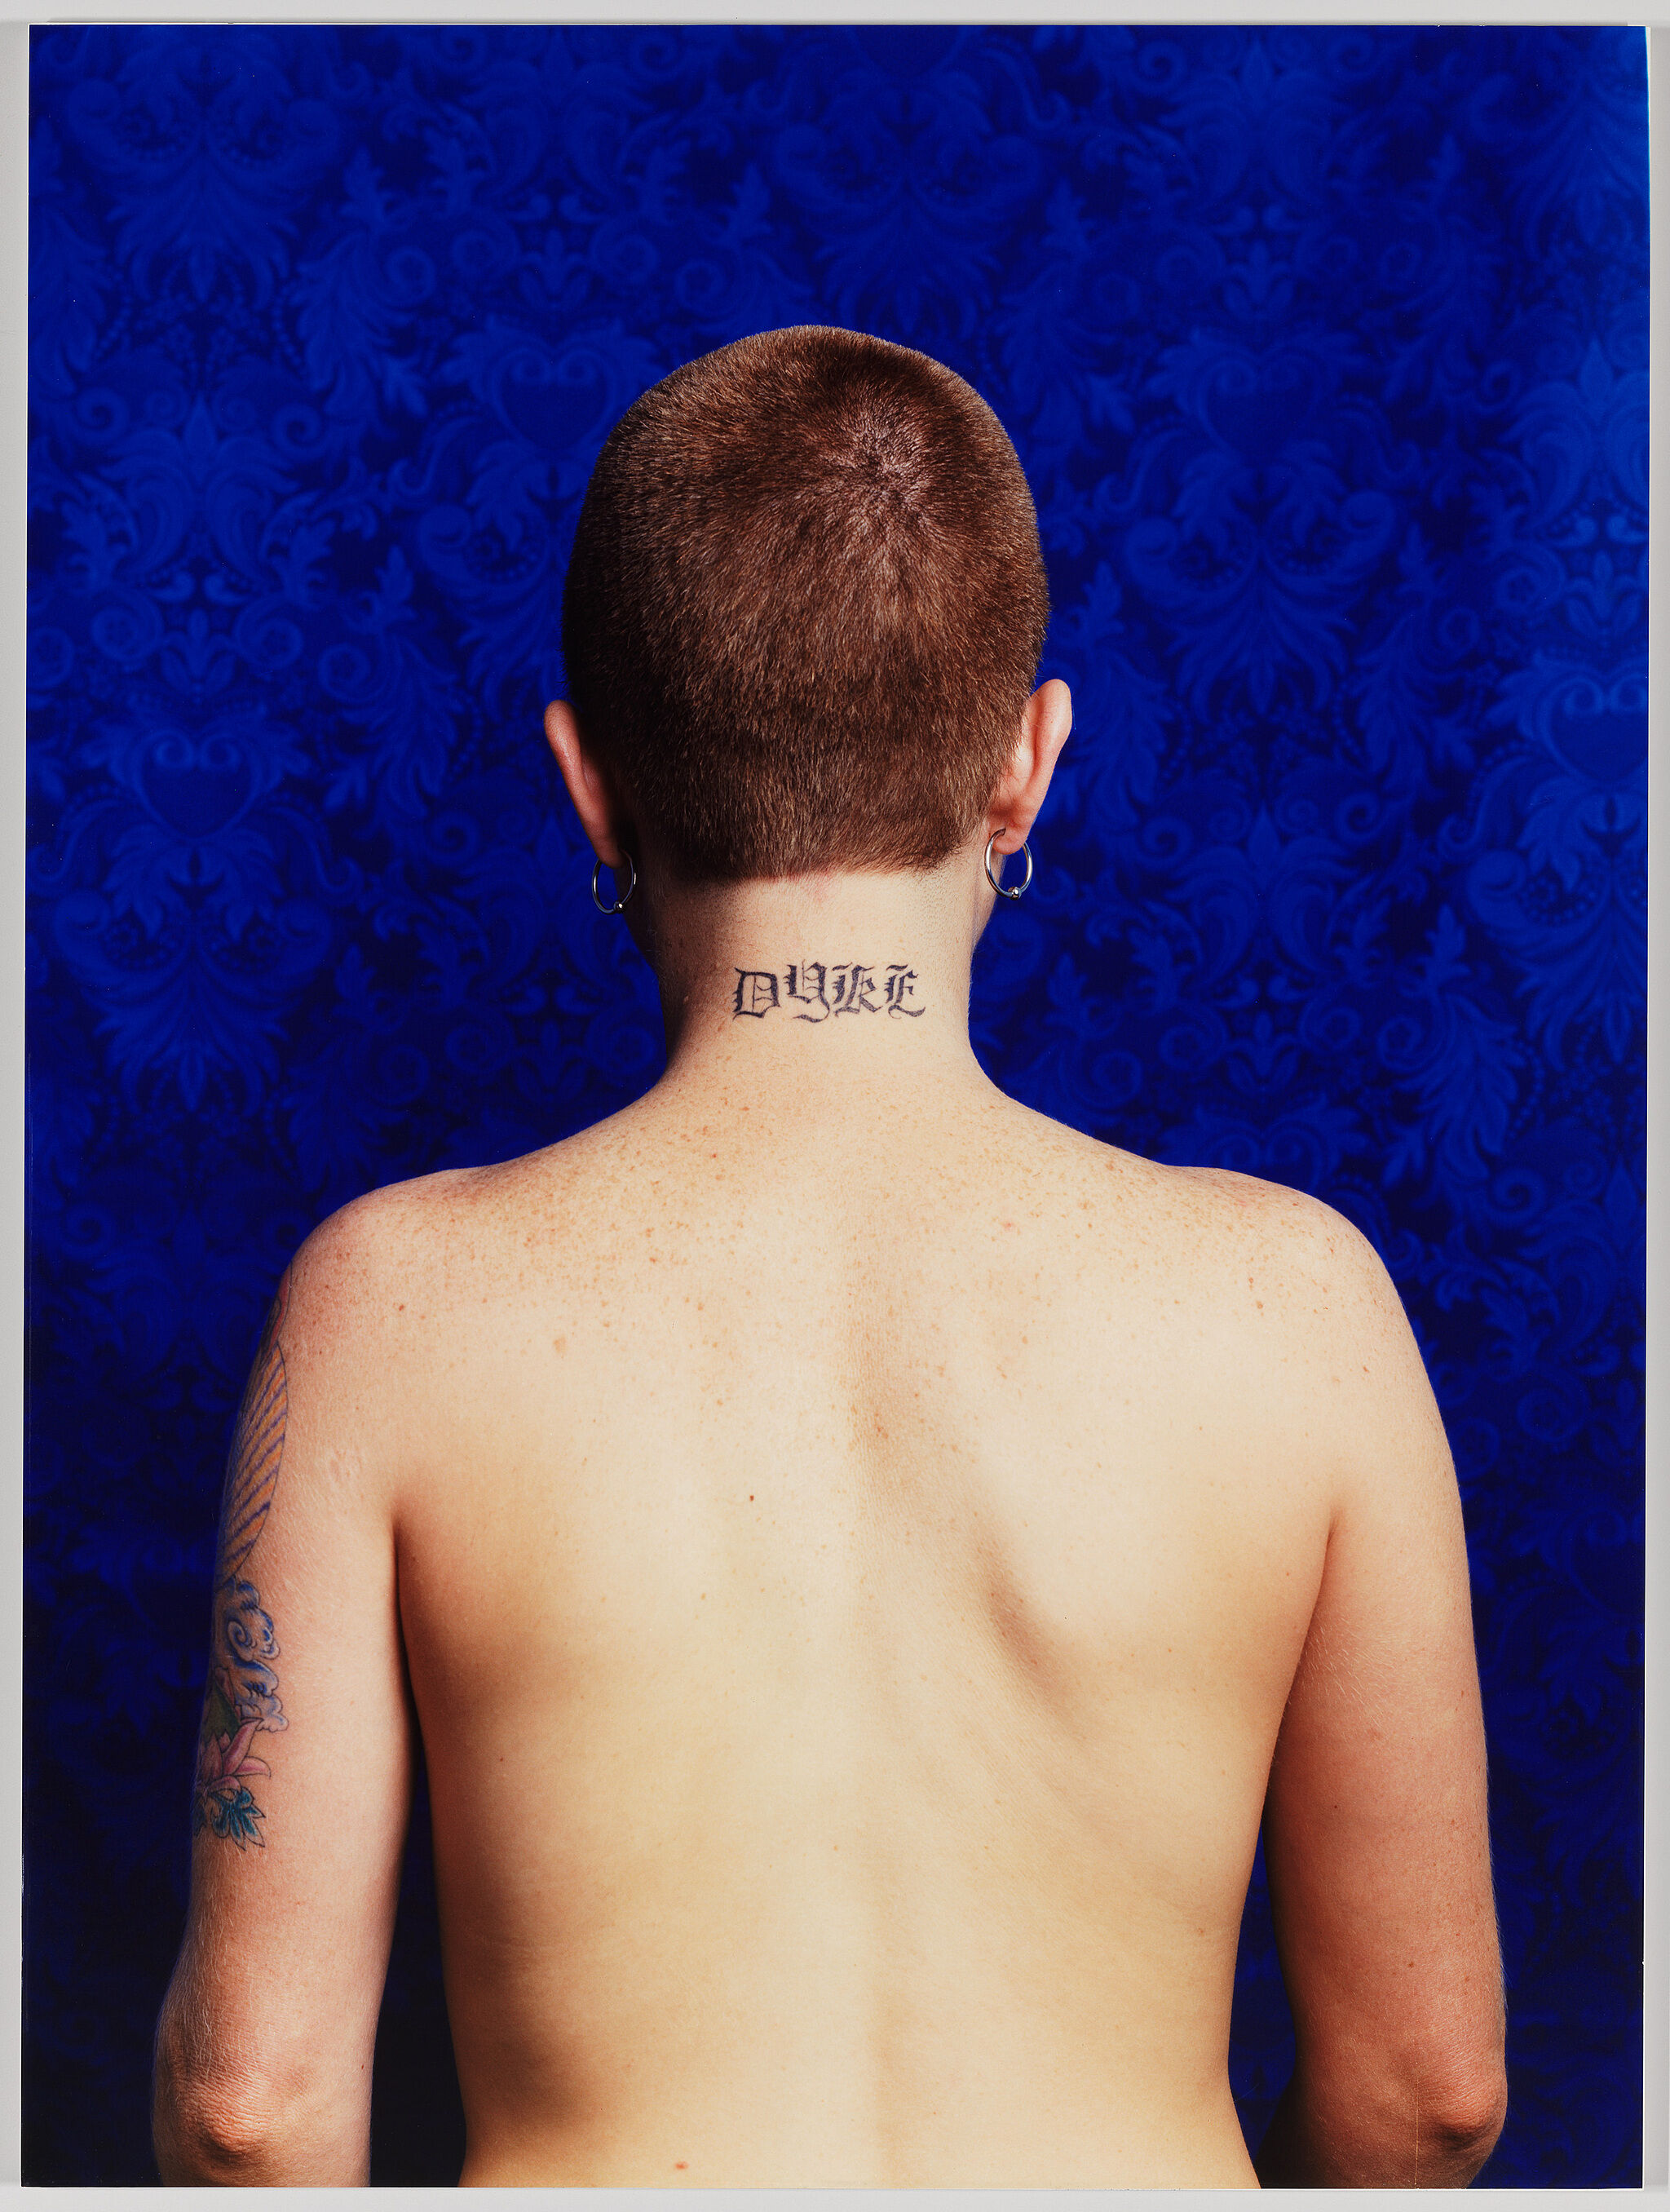 Photograph of a person's naked back.